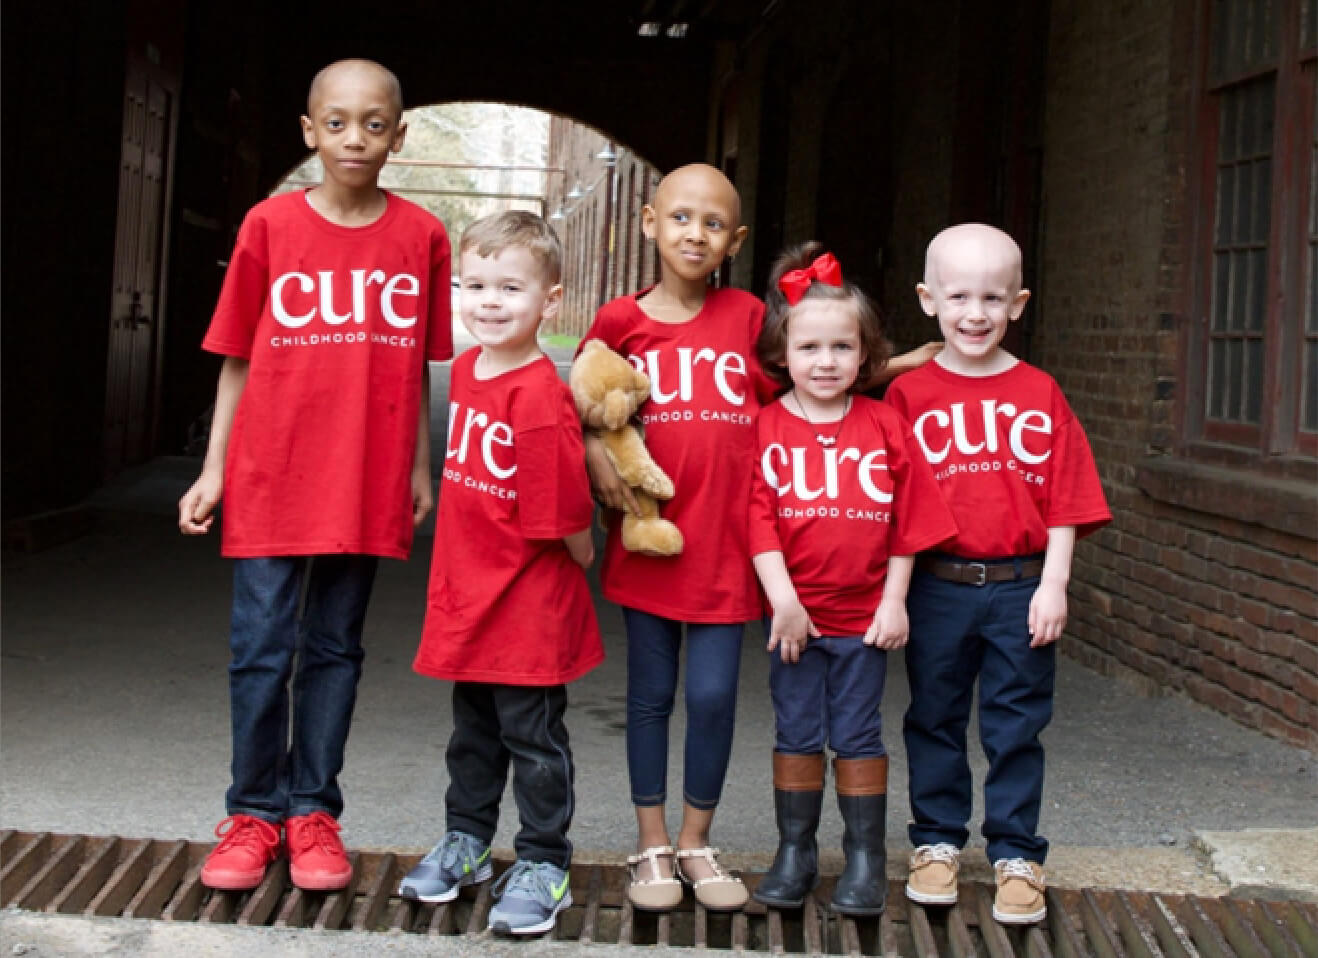 children wearing red "cure" shirts